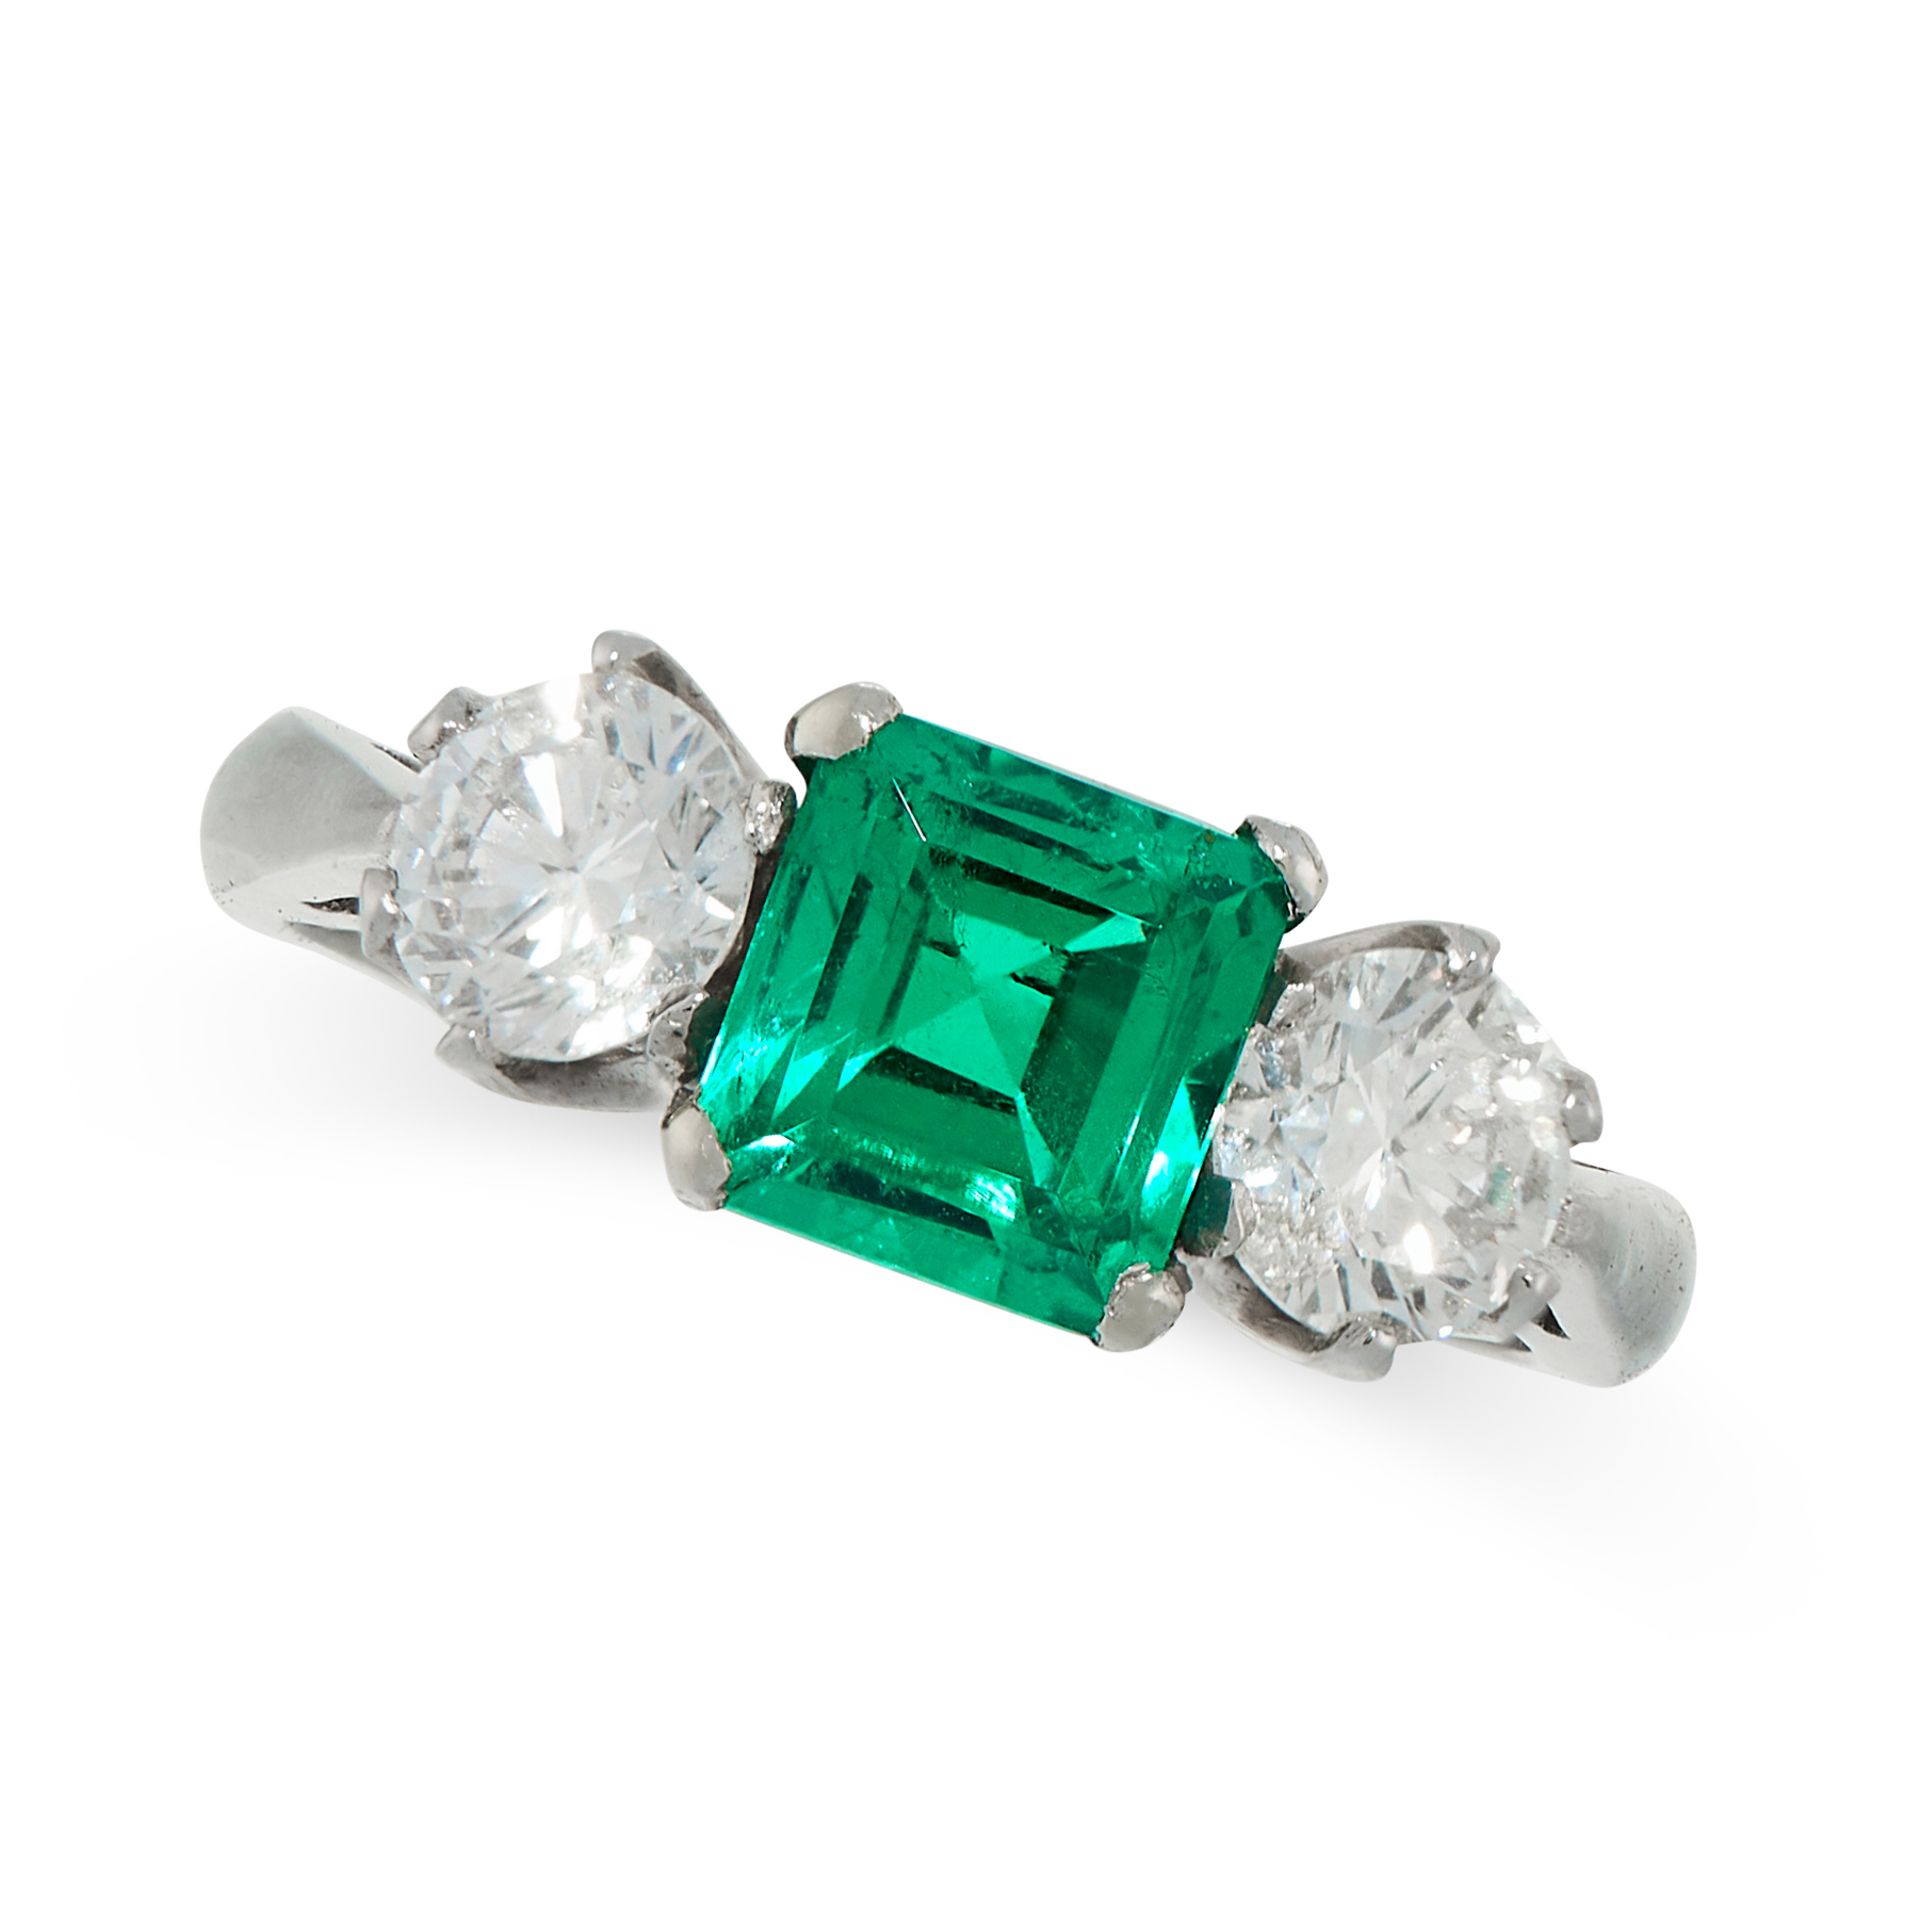 COLOMBIAN EMERALD AND DIAMOND DRESS RING in platinum, set with an emerald cut emerald of 1.33